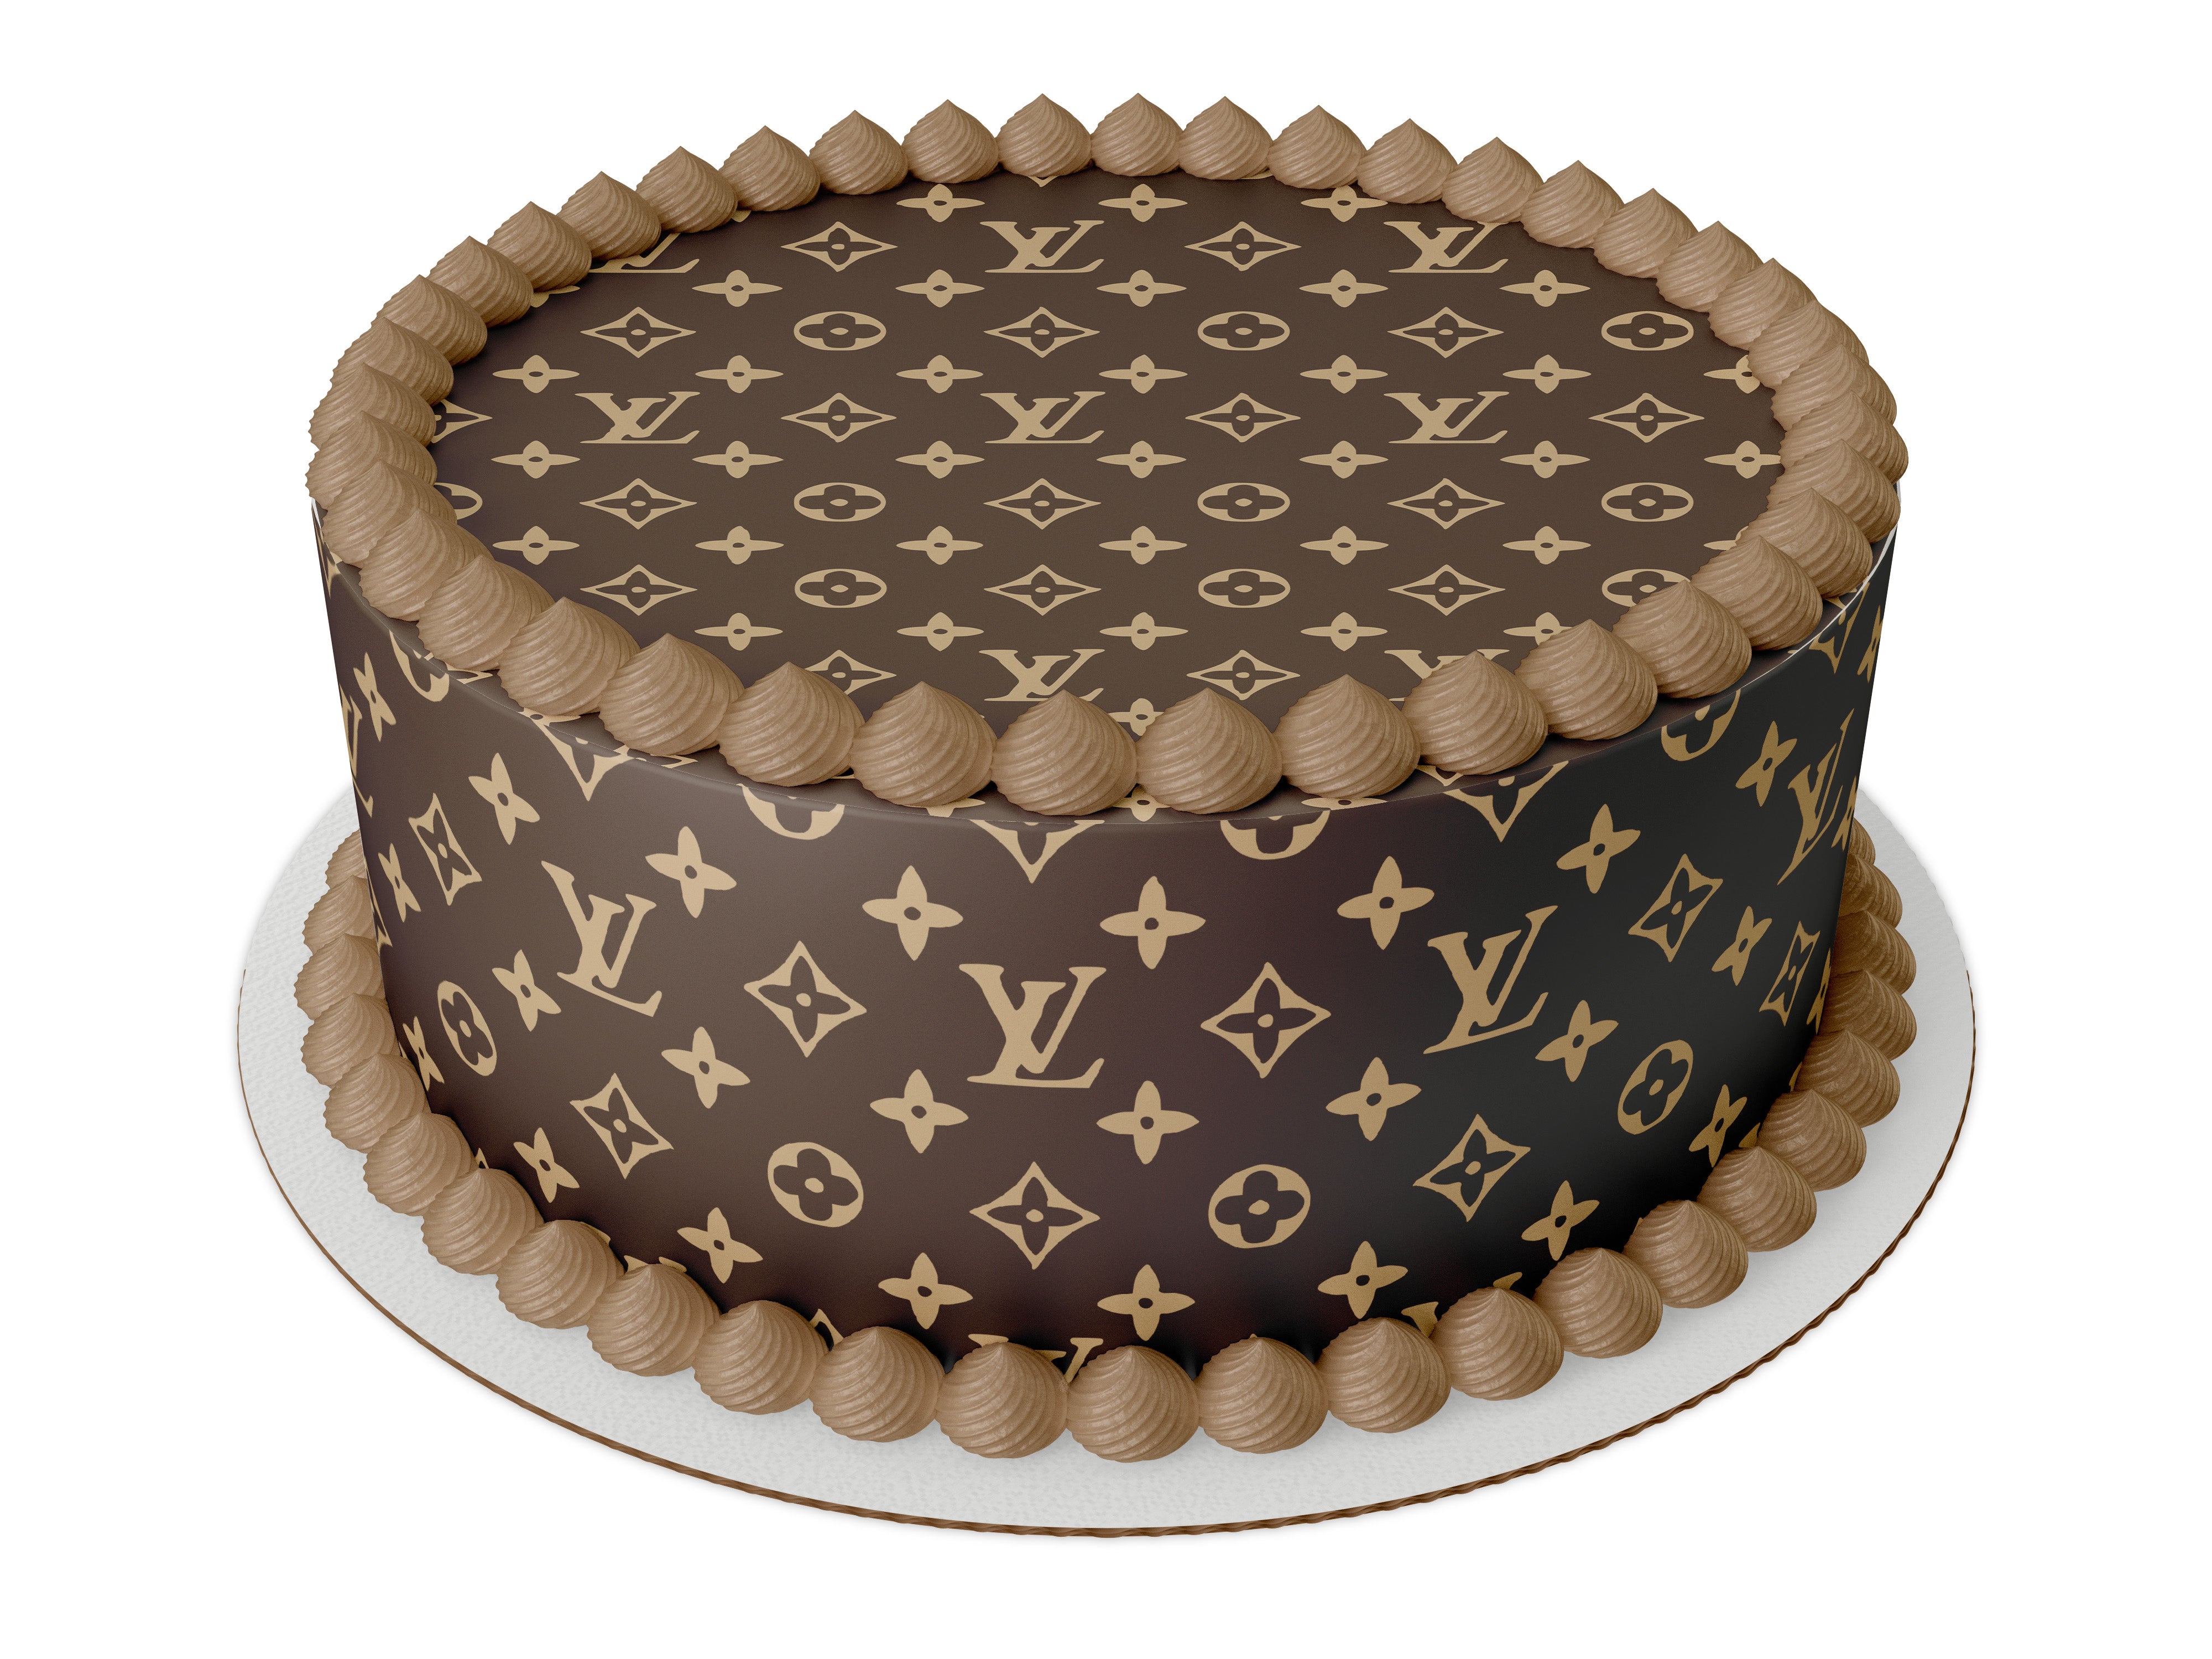 Louis Vuitton Pattern Edible Cake Toppers, Edible Picture